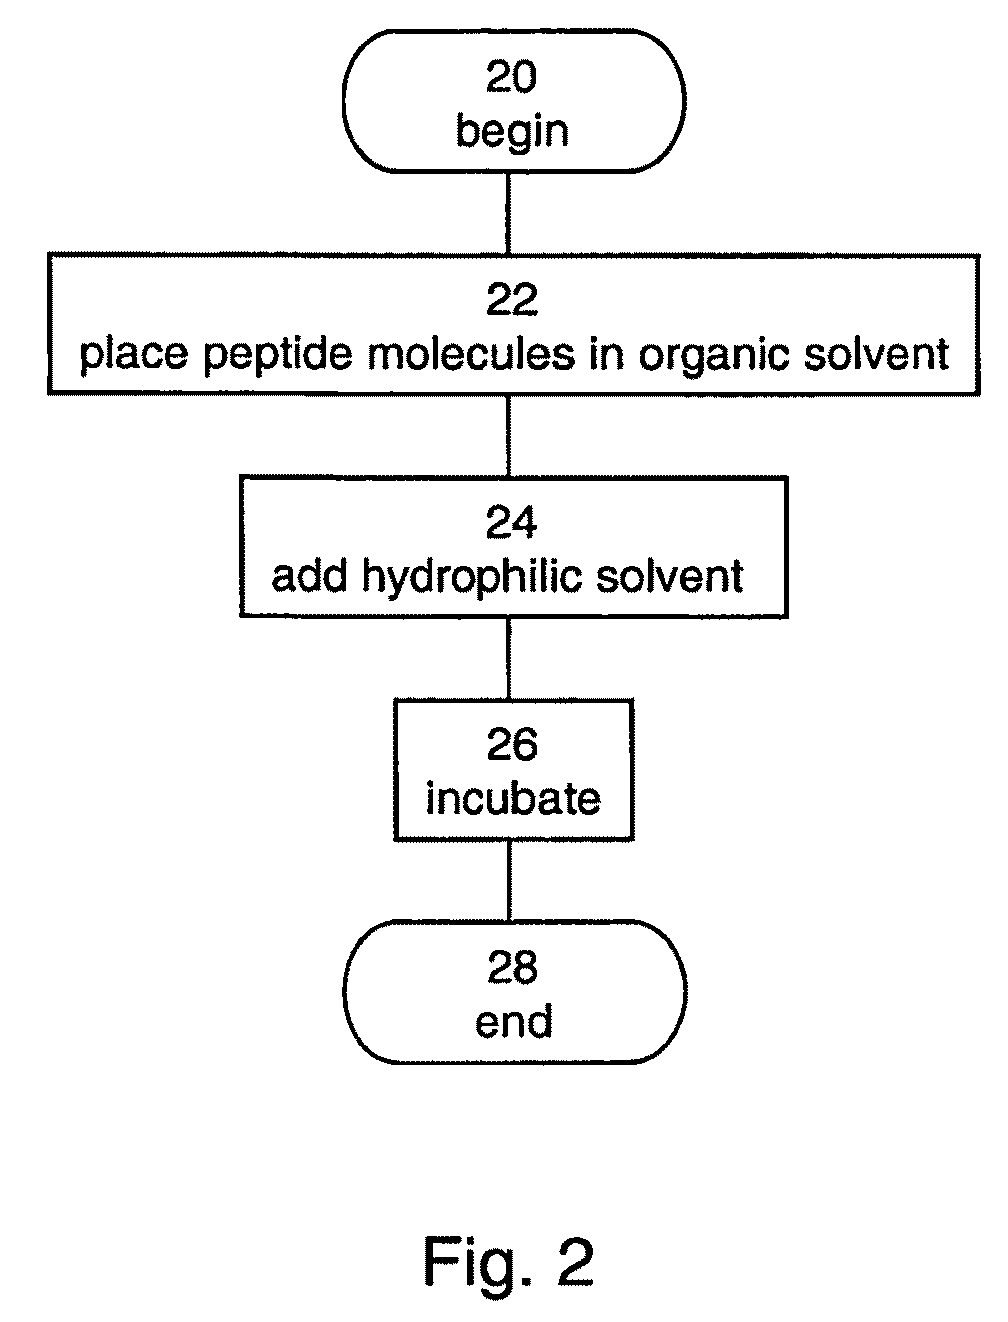 Method of forming a fiber made of peptide nanostructures